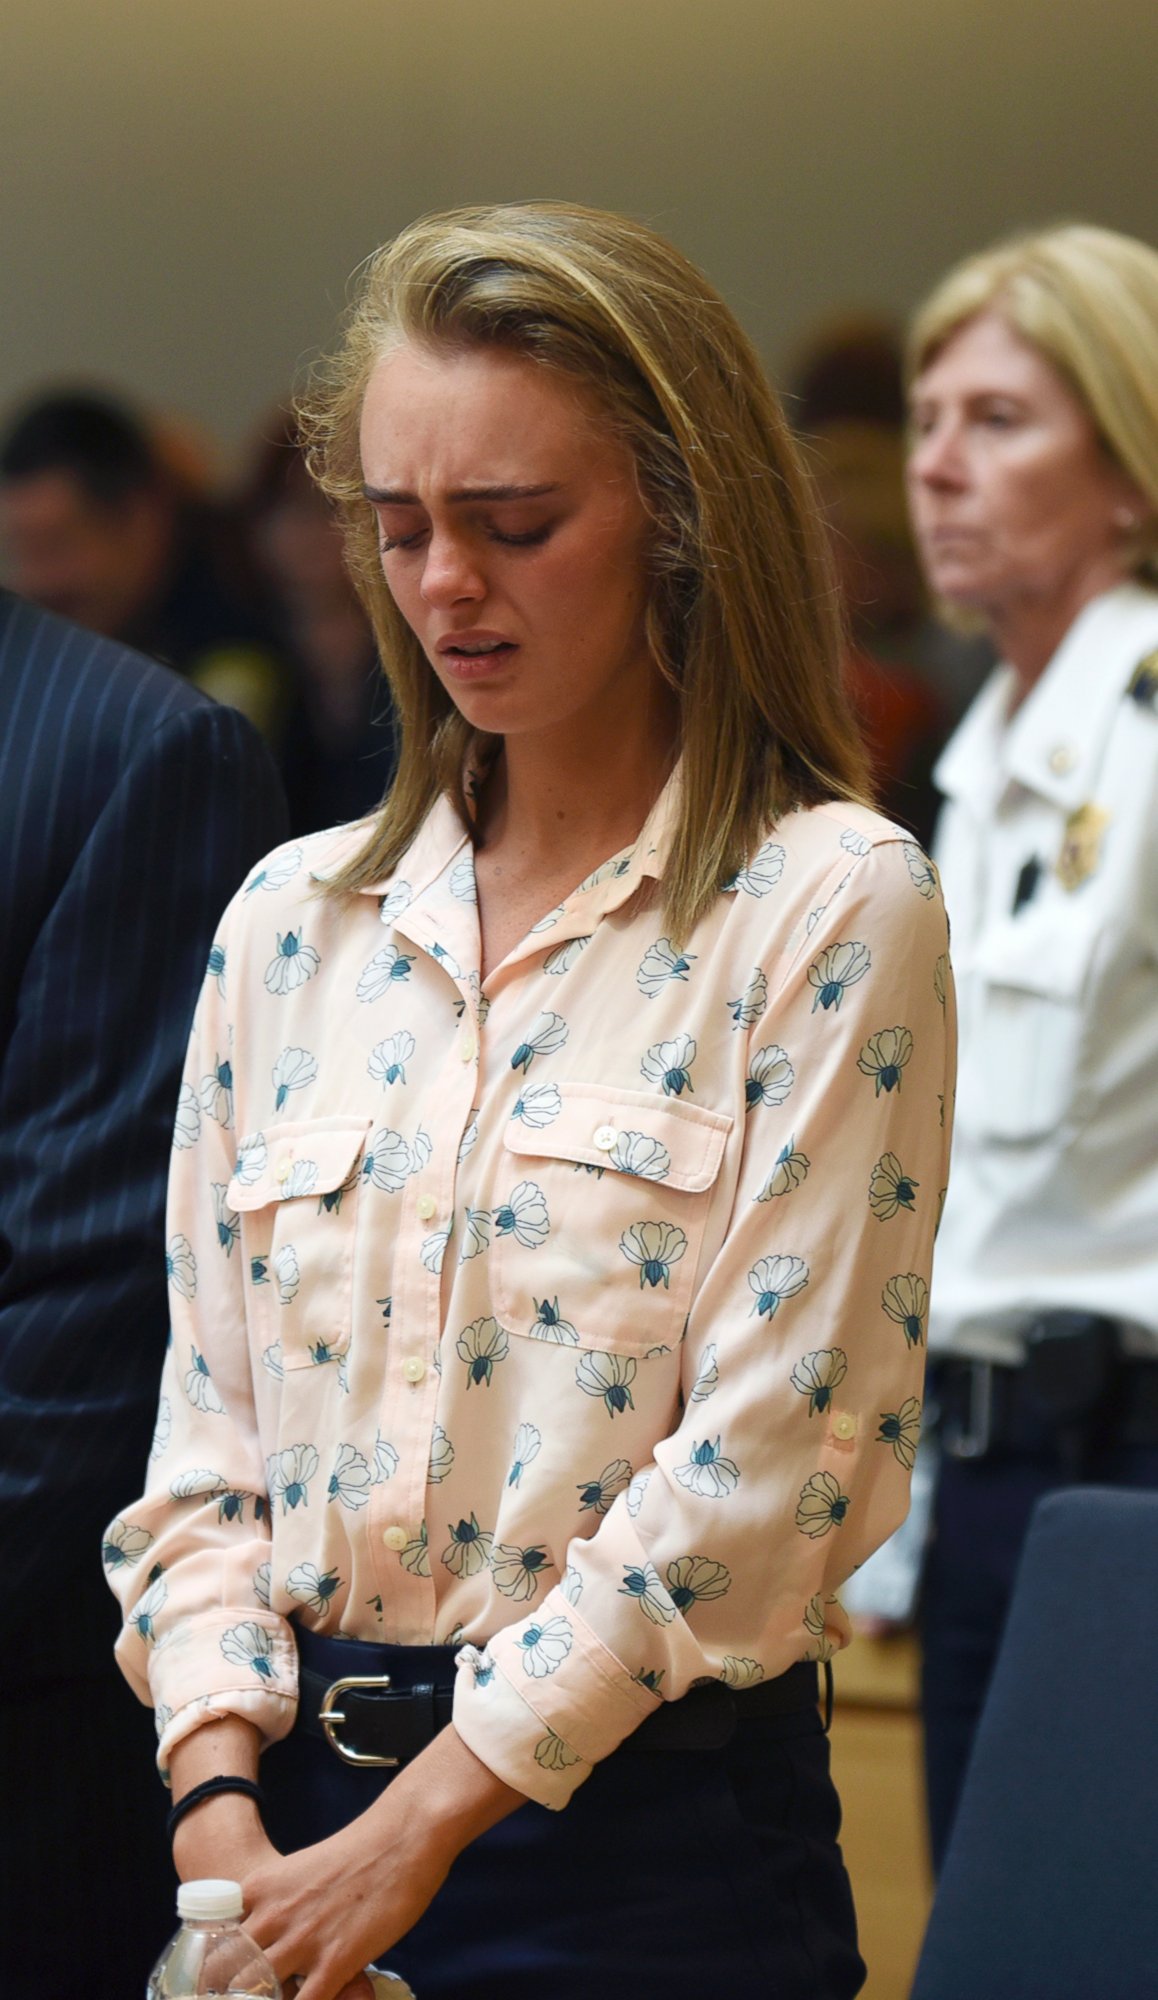 PHOTO: Michelle Carter cries after being found guilty of involuntary manslaughter in the suicide of Conrad Roy III, June 16, 2017, in Bristol Juvenile Court in Taunton, Mass.